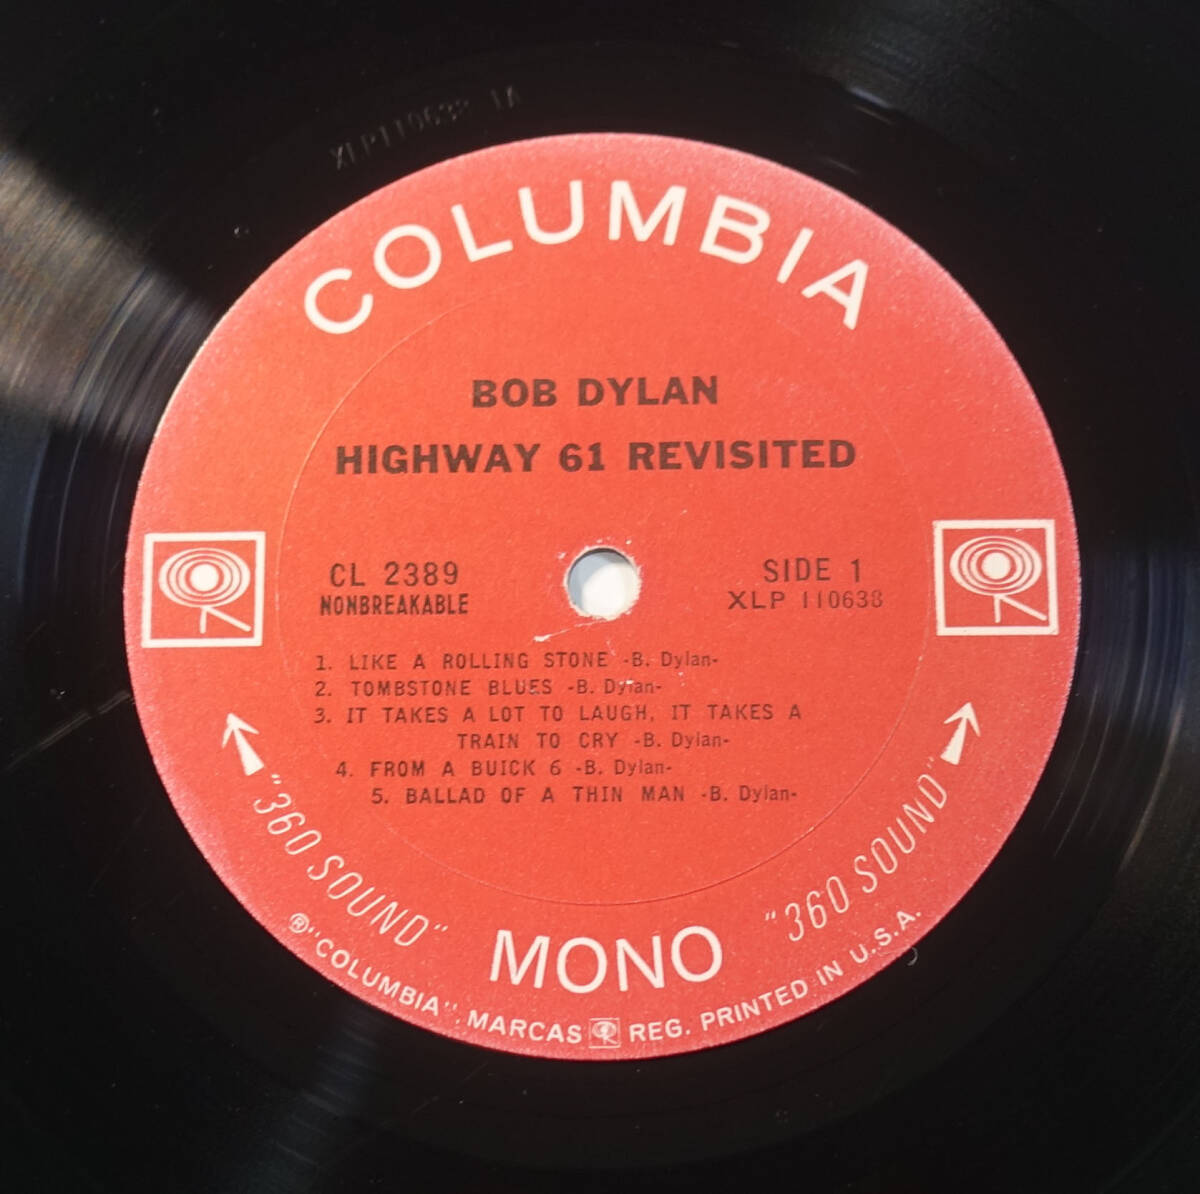 US Columbia MONO CL 2389 最初回 Highway 61 Revisited / Bob Dylan MAT: 1A/1A _画像3